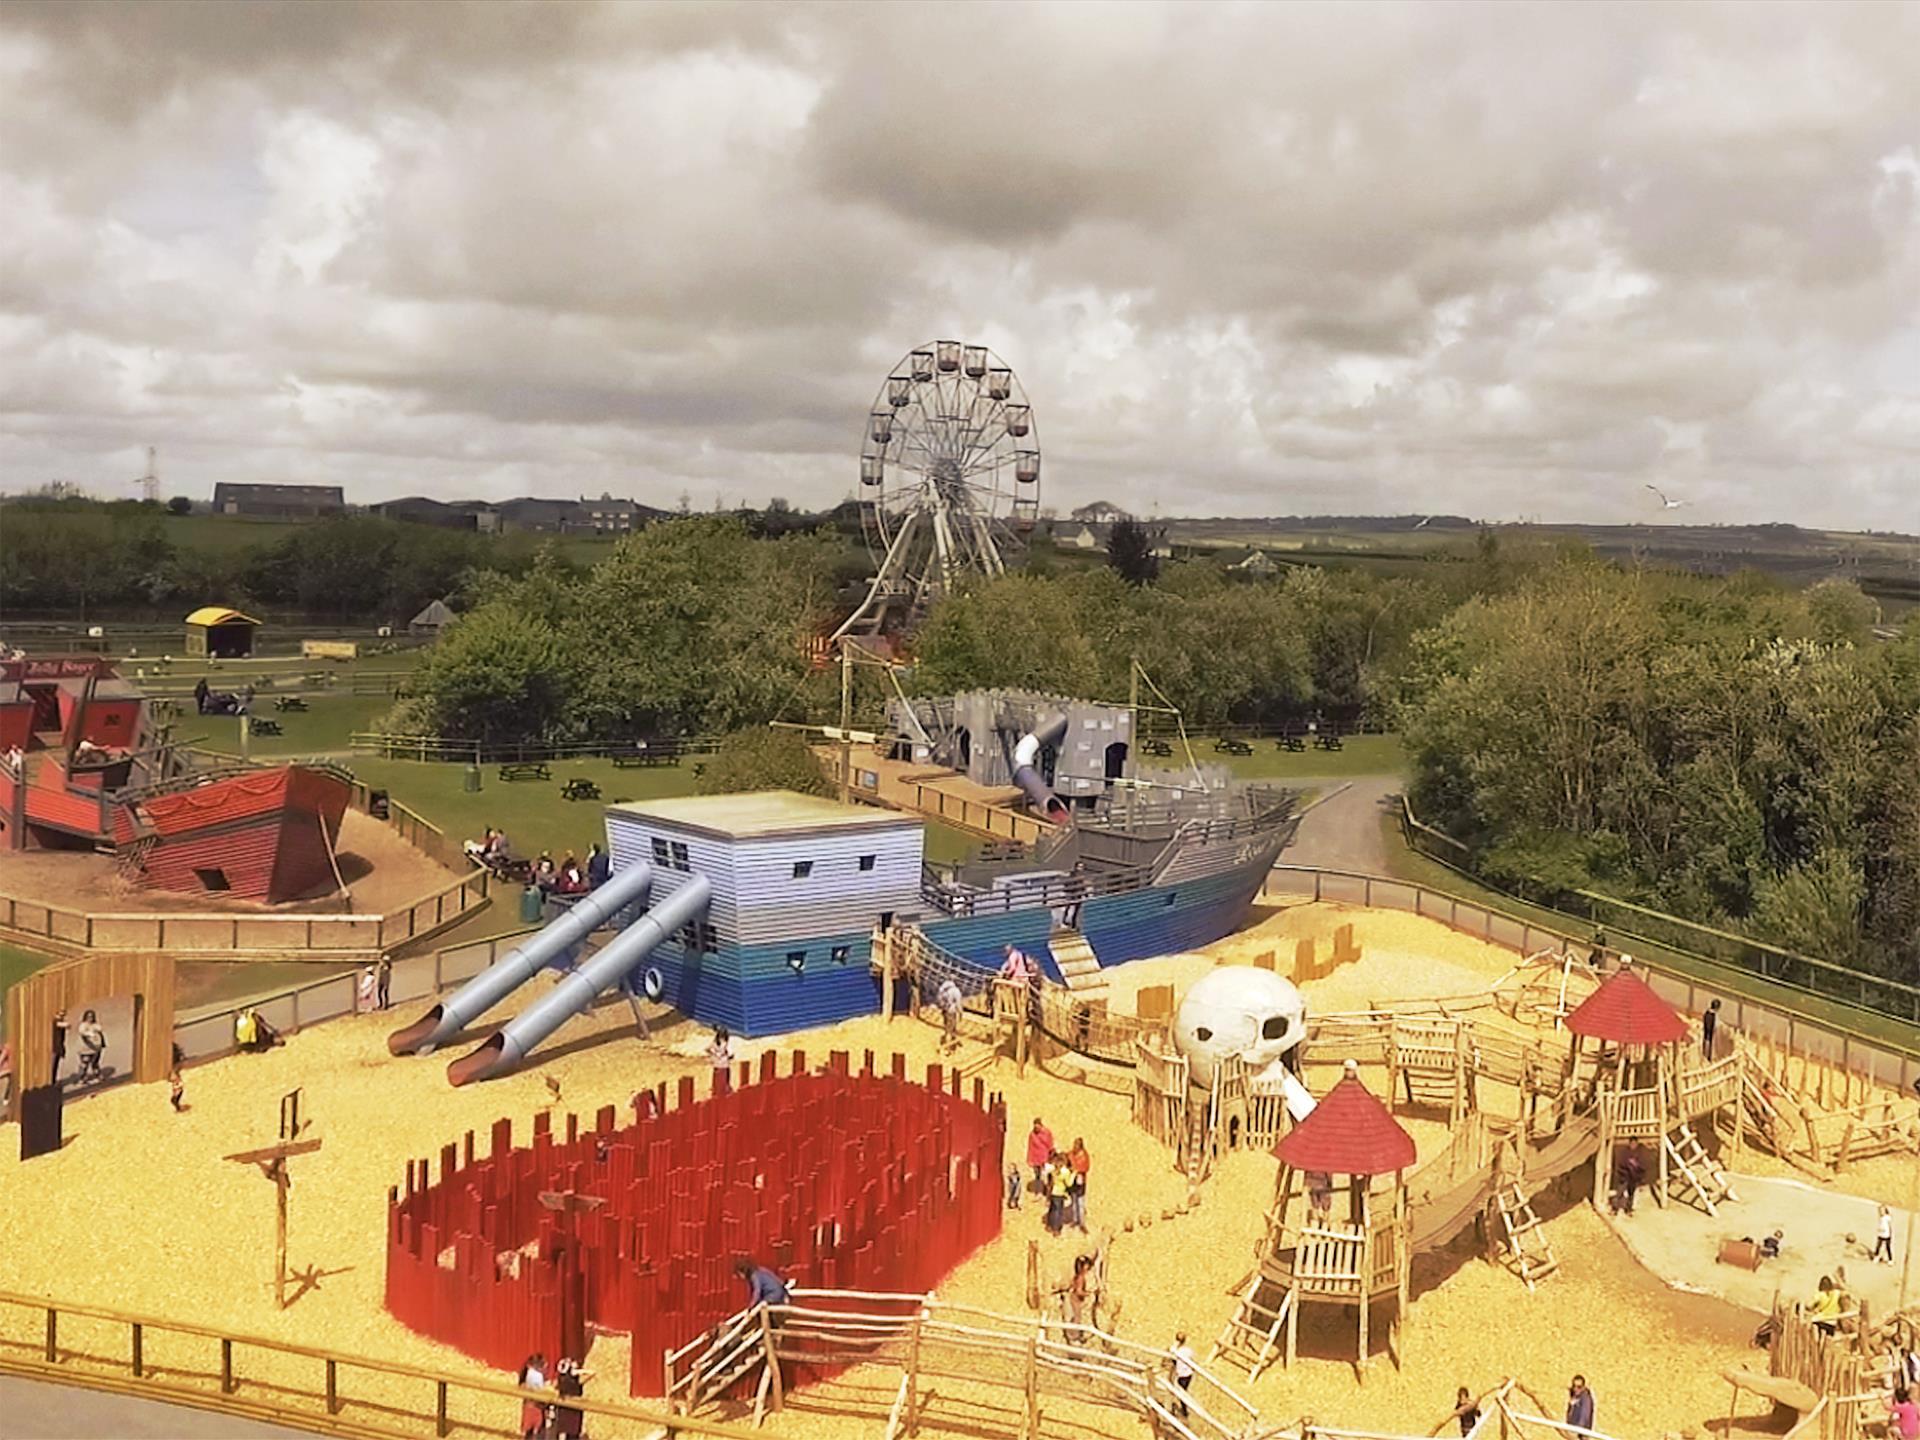 The Pirate Playground at Folly Farm